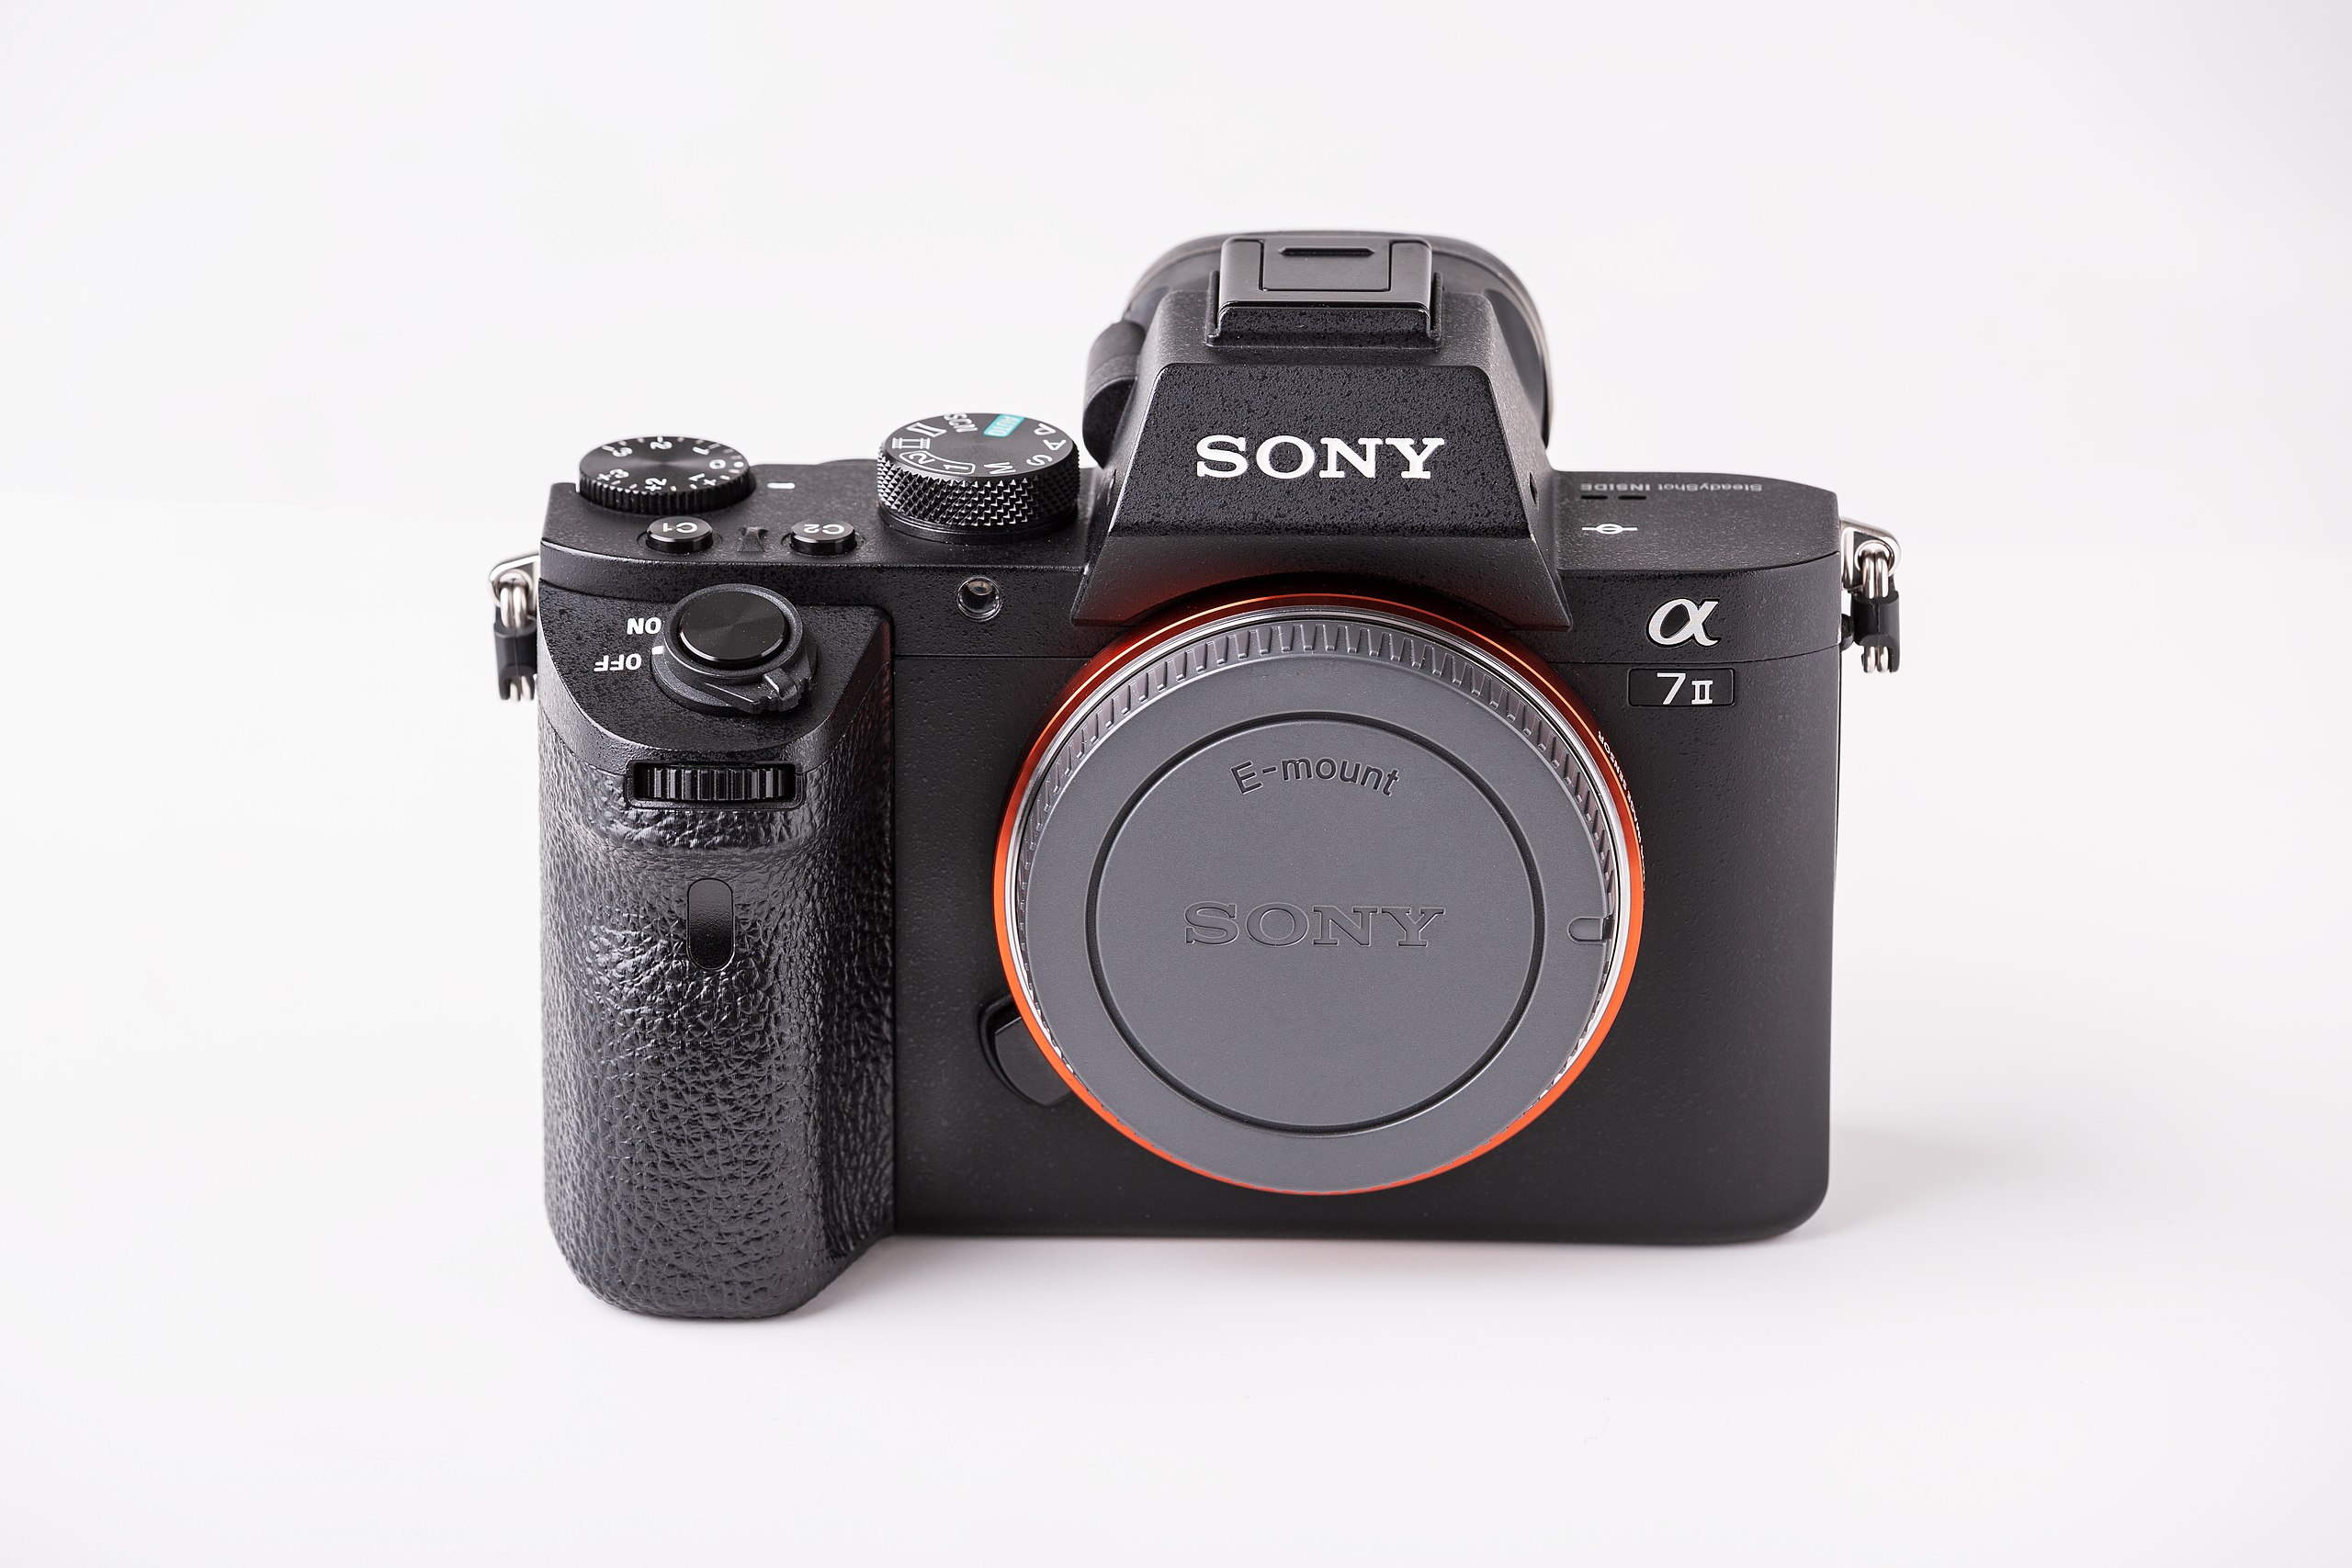 File:Sony A7II (ILCE-7M2) - front view with body cap.jpg - Wikimedia 